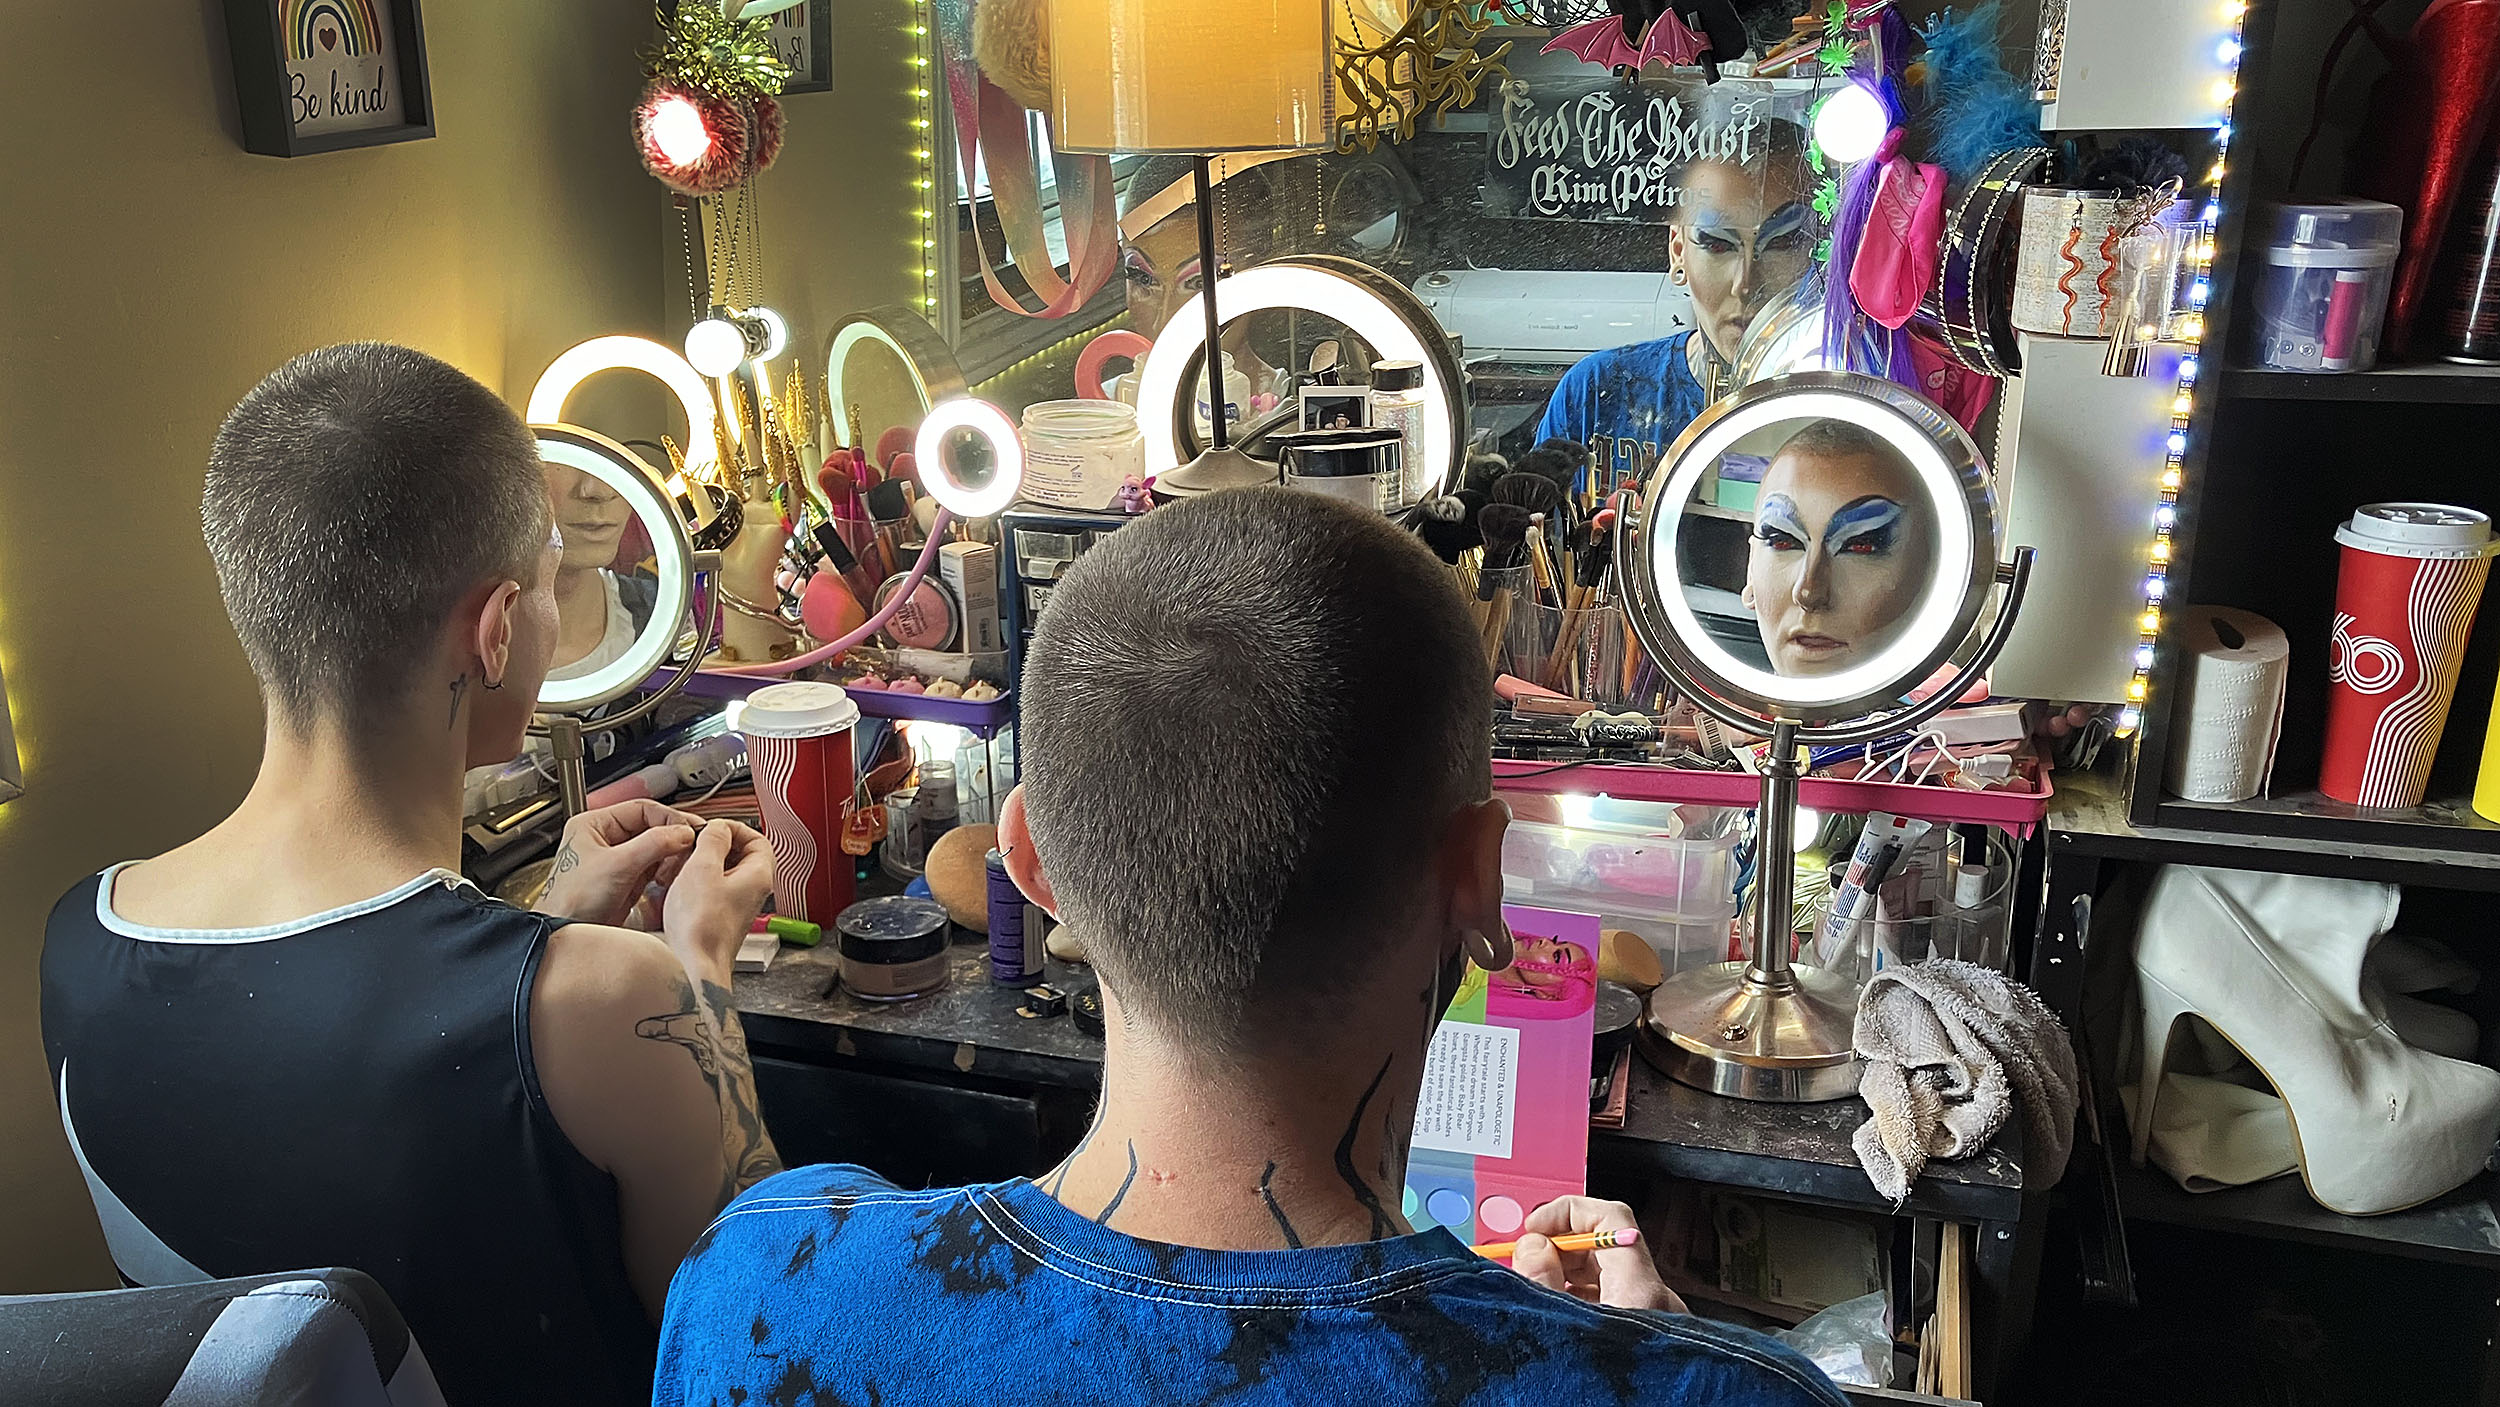 Two drag performers put on makeup.